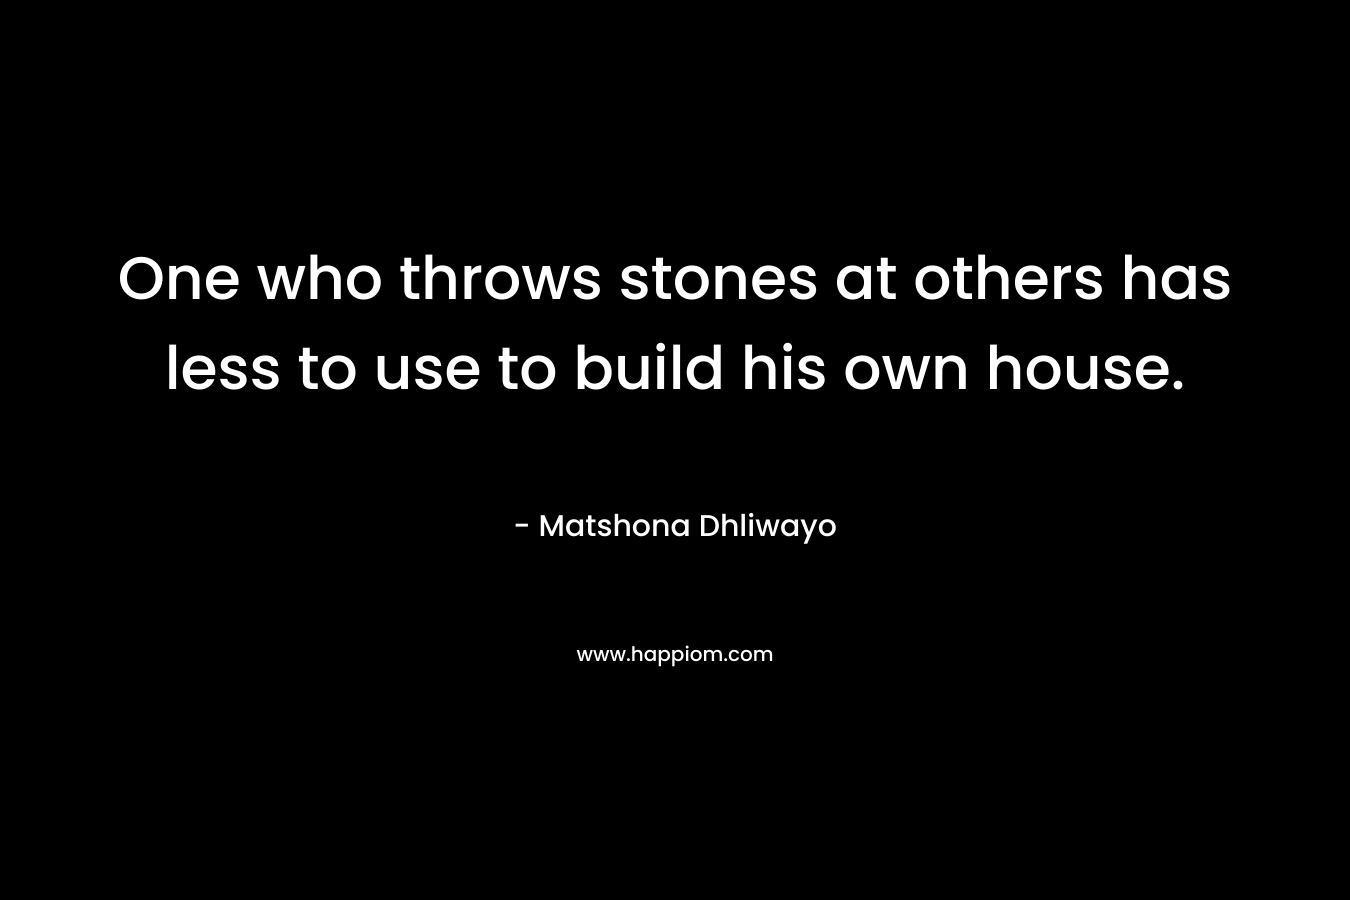 One who throws stones at others has less to use to build his own house.